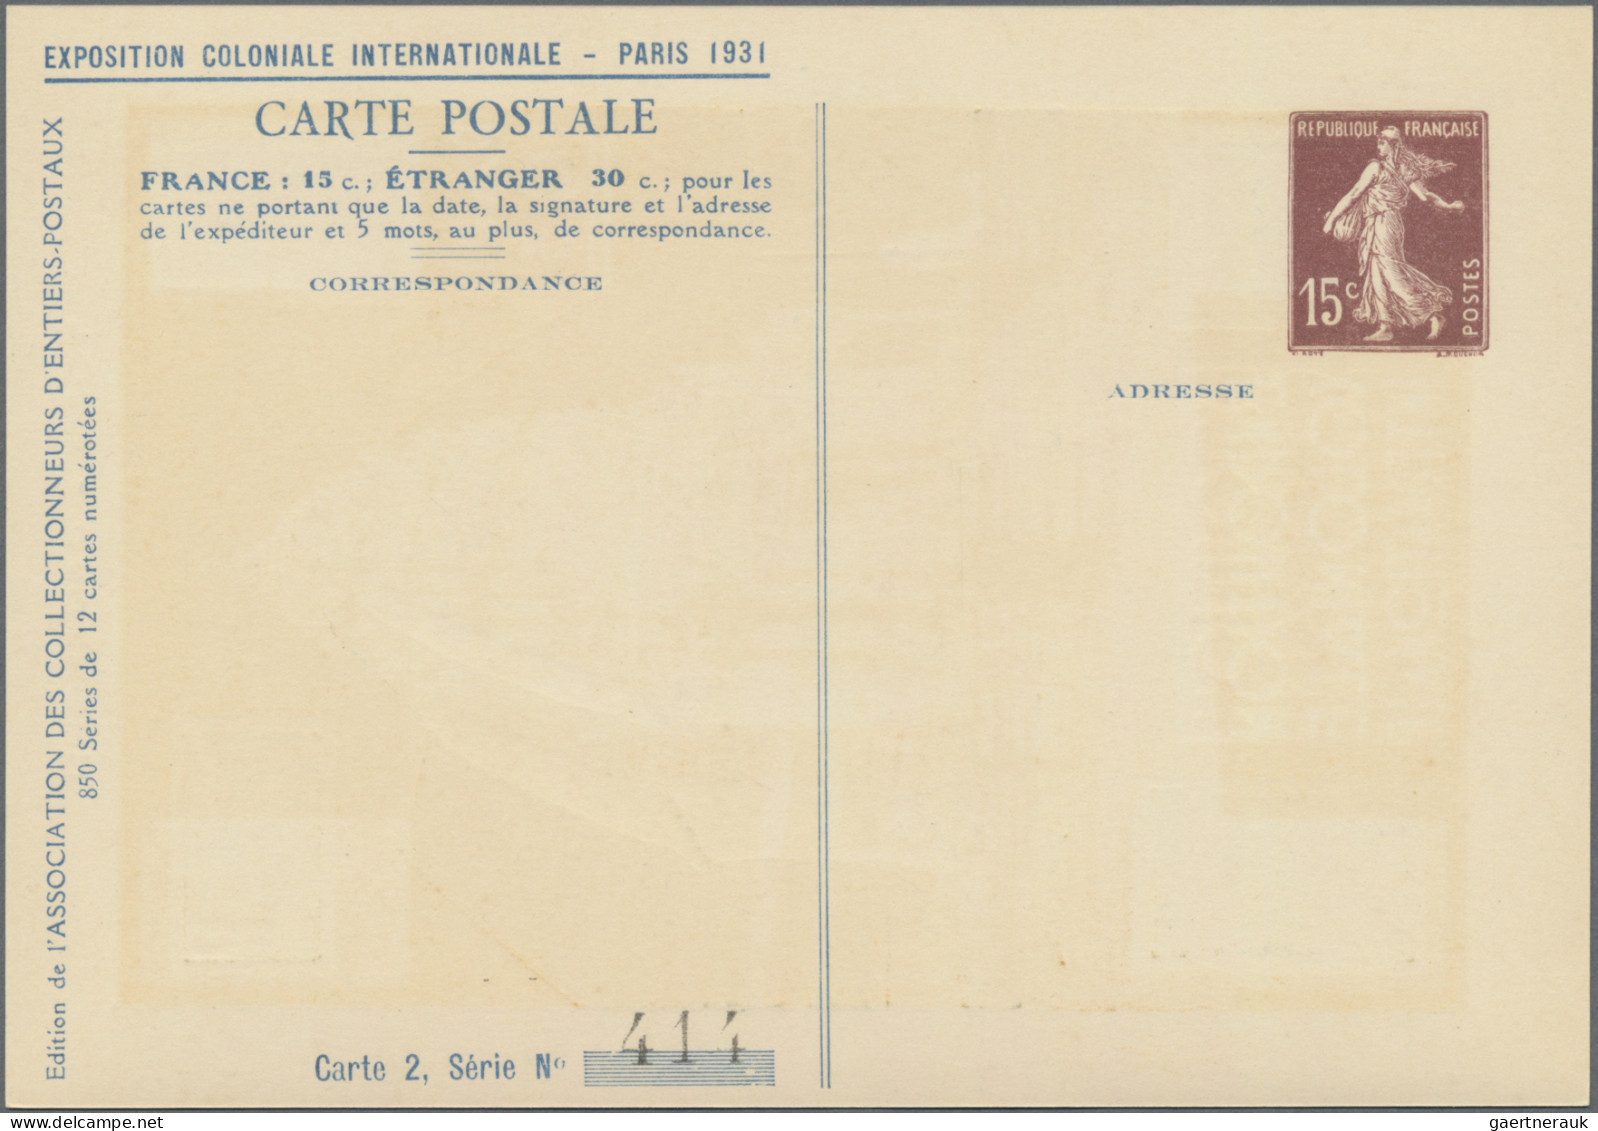 France - Postal stationery: 1931, 15c. Semeuse, printed-to-order stationery card